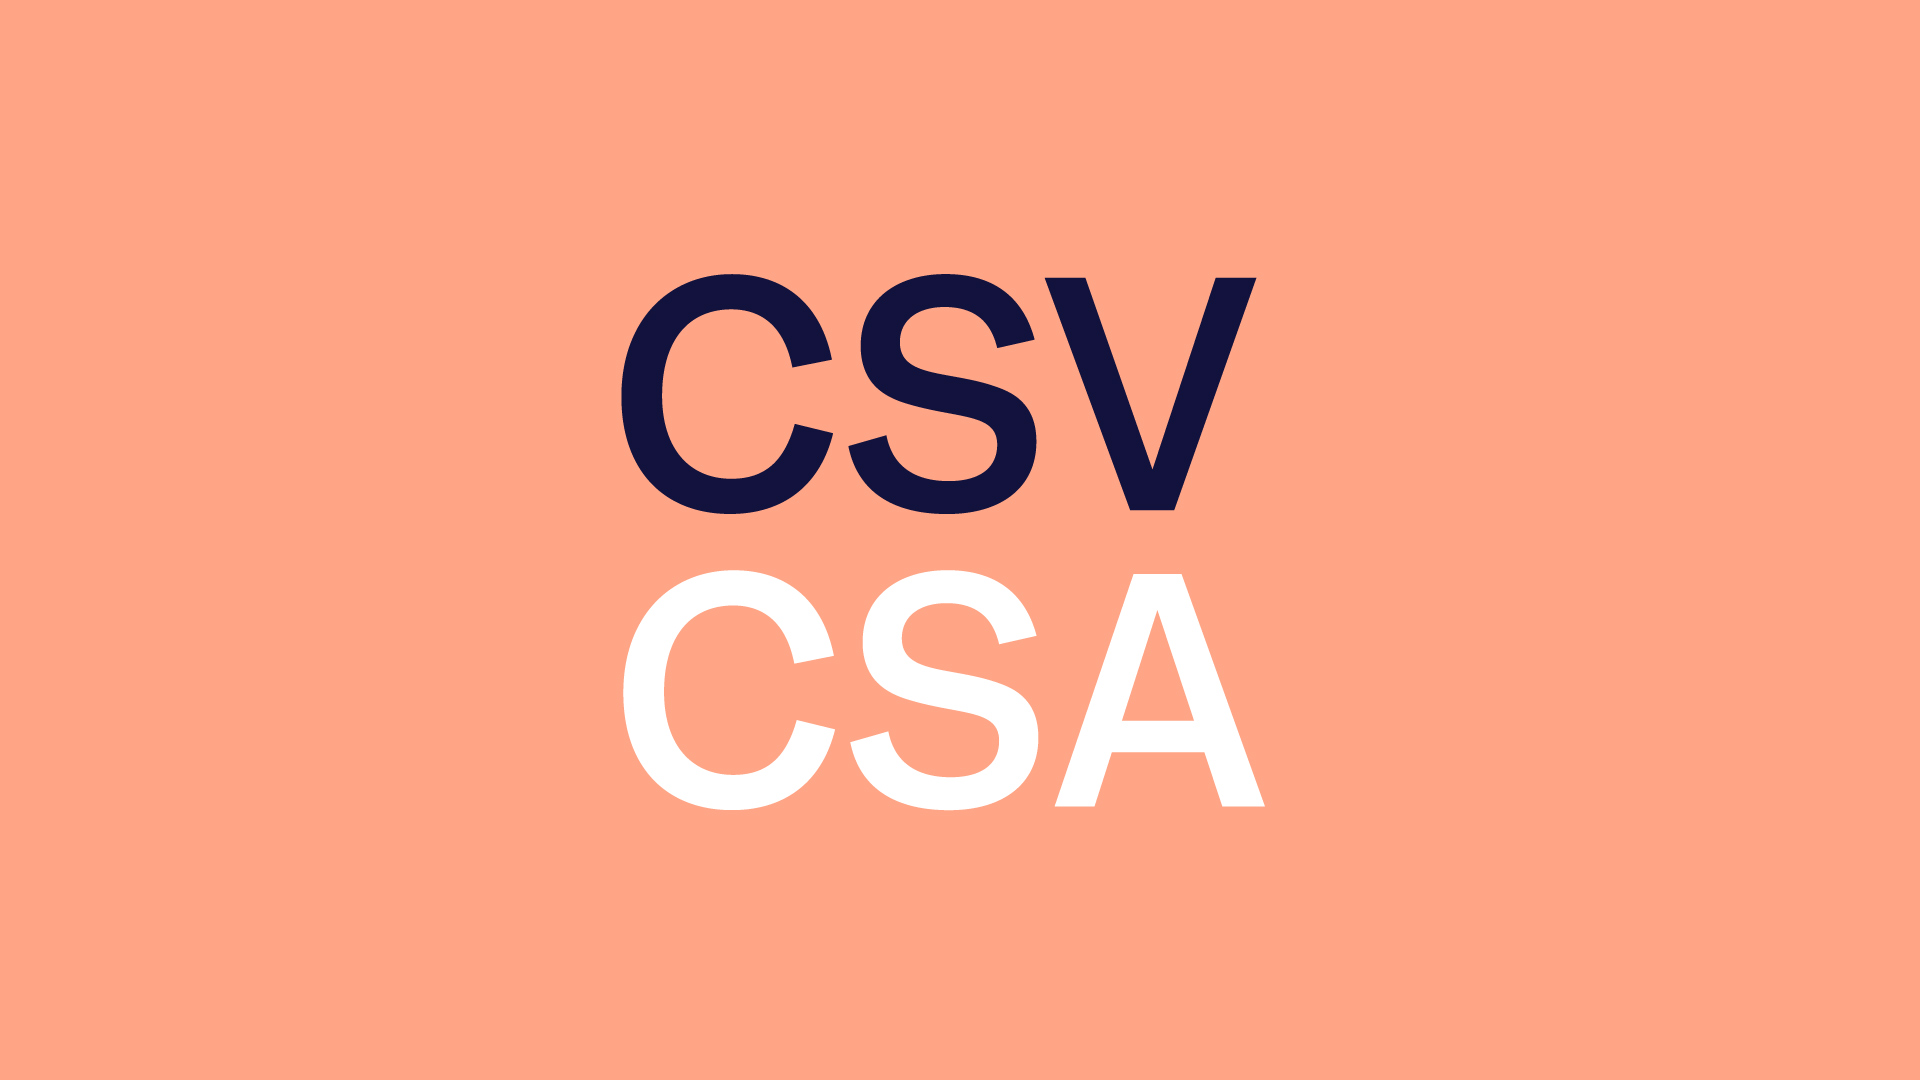 CSV vs. CSA: What Are the Main Differences? | Scilife